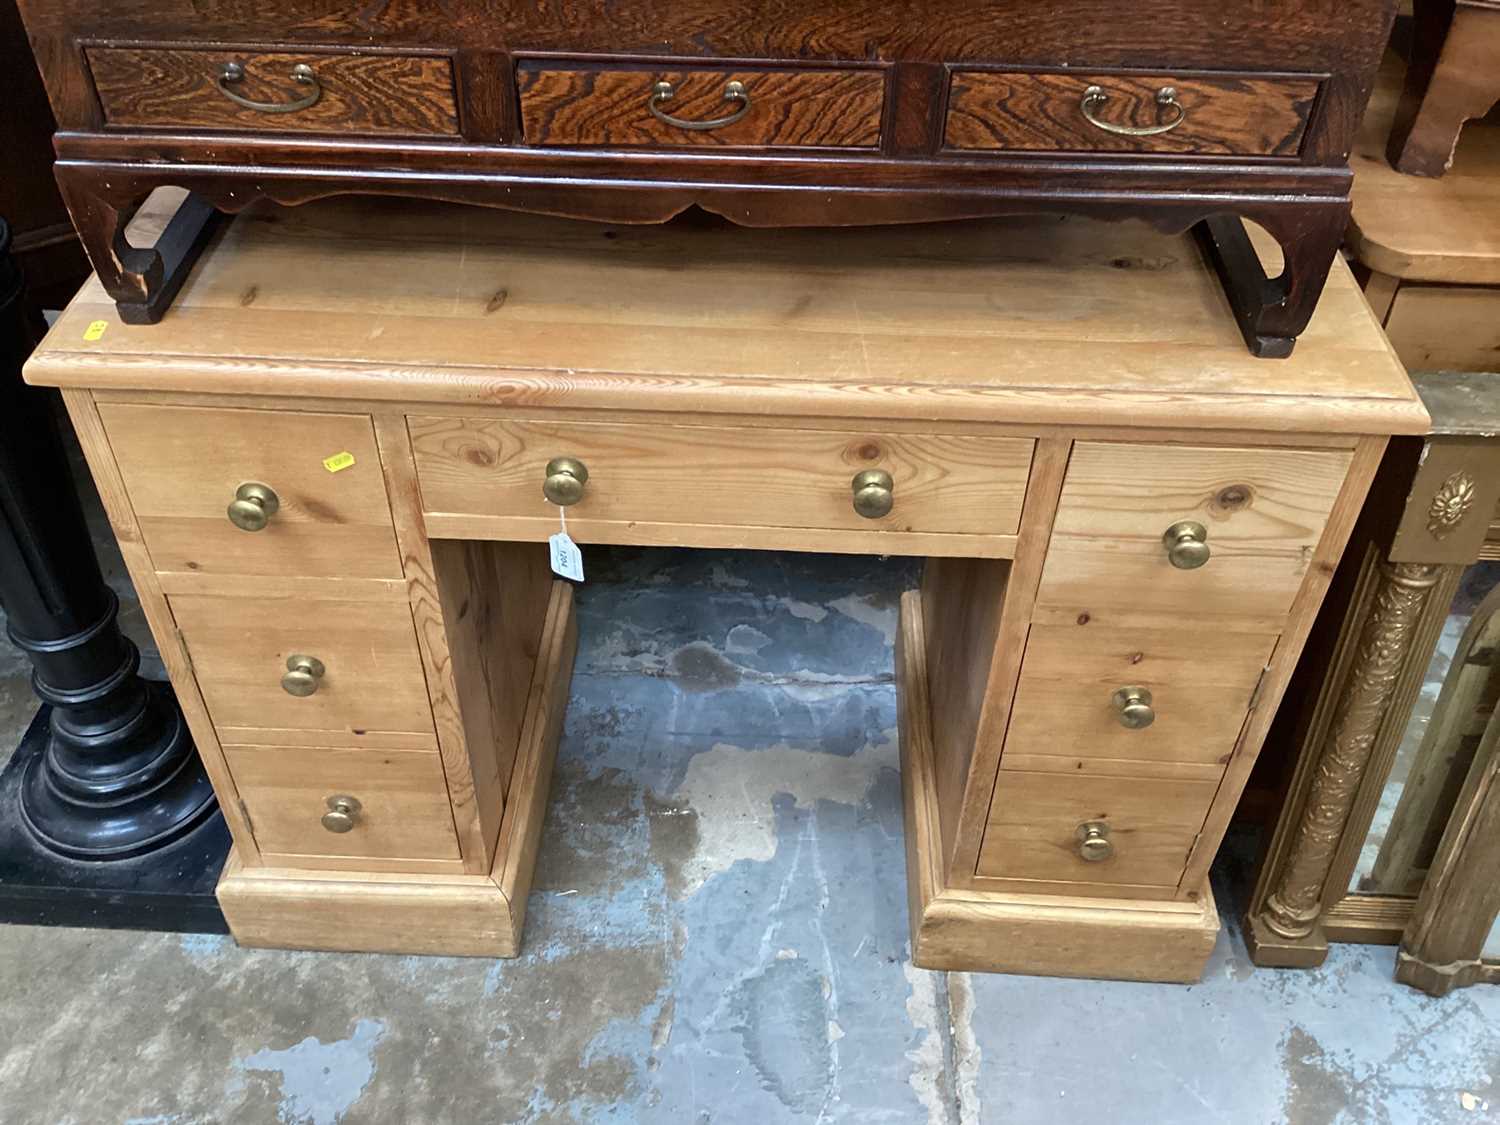 Victorian-style pine kneehole desk with an arrangement of cupboards and drawers